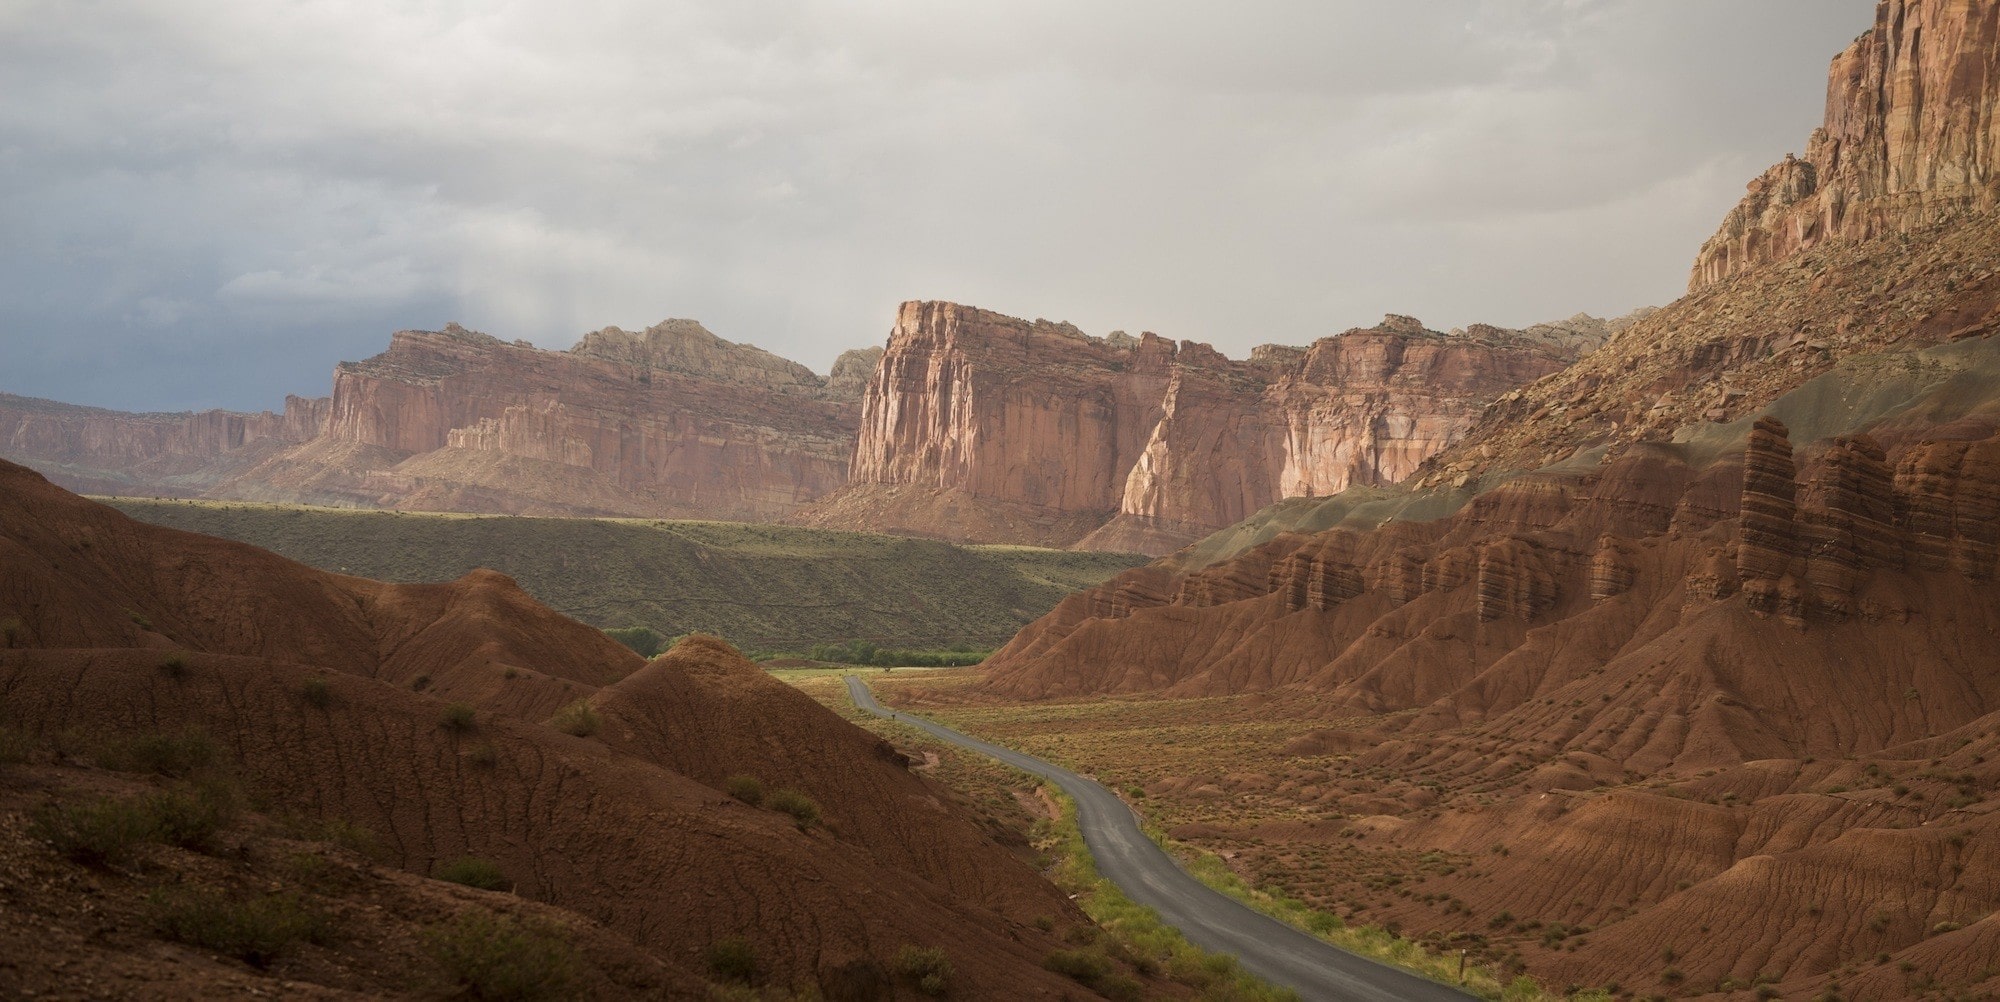 Capitol Reef Scenic Drive // Explore Utah National Parks in this 9-day road trip itinerary with the best hikes, activities & camping in Zion, Bryce, Capitol Reef, Arches & Canyonlands.